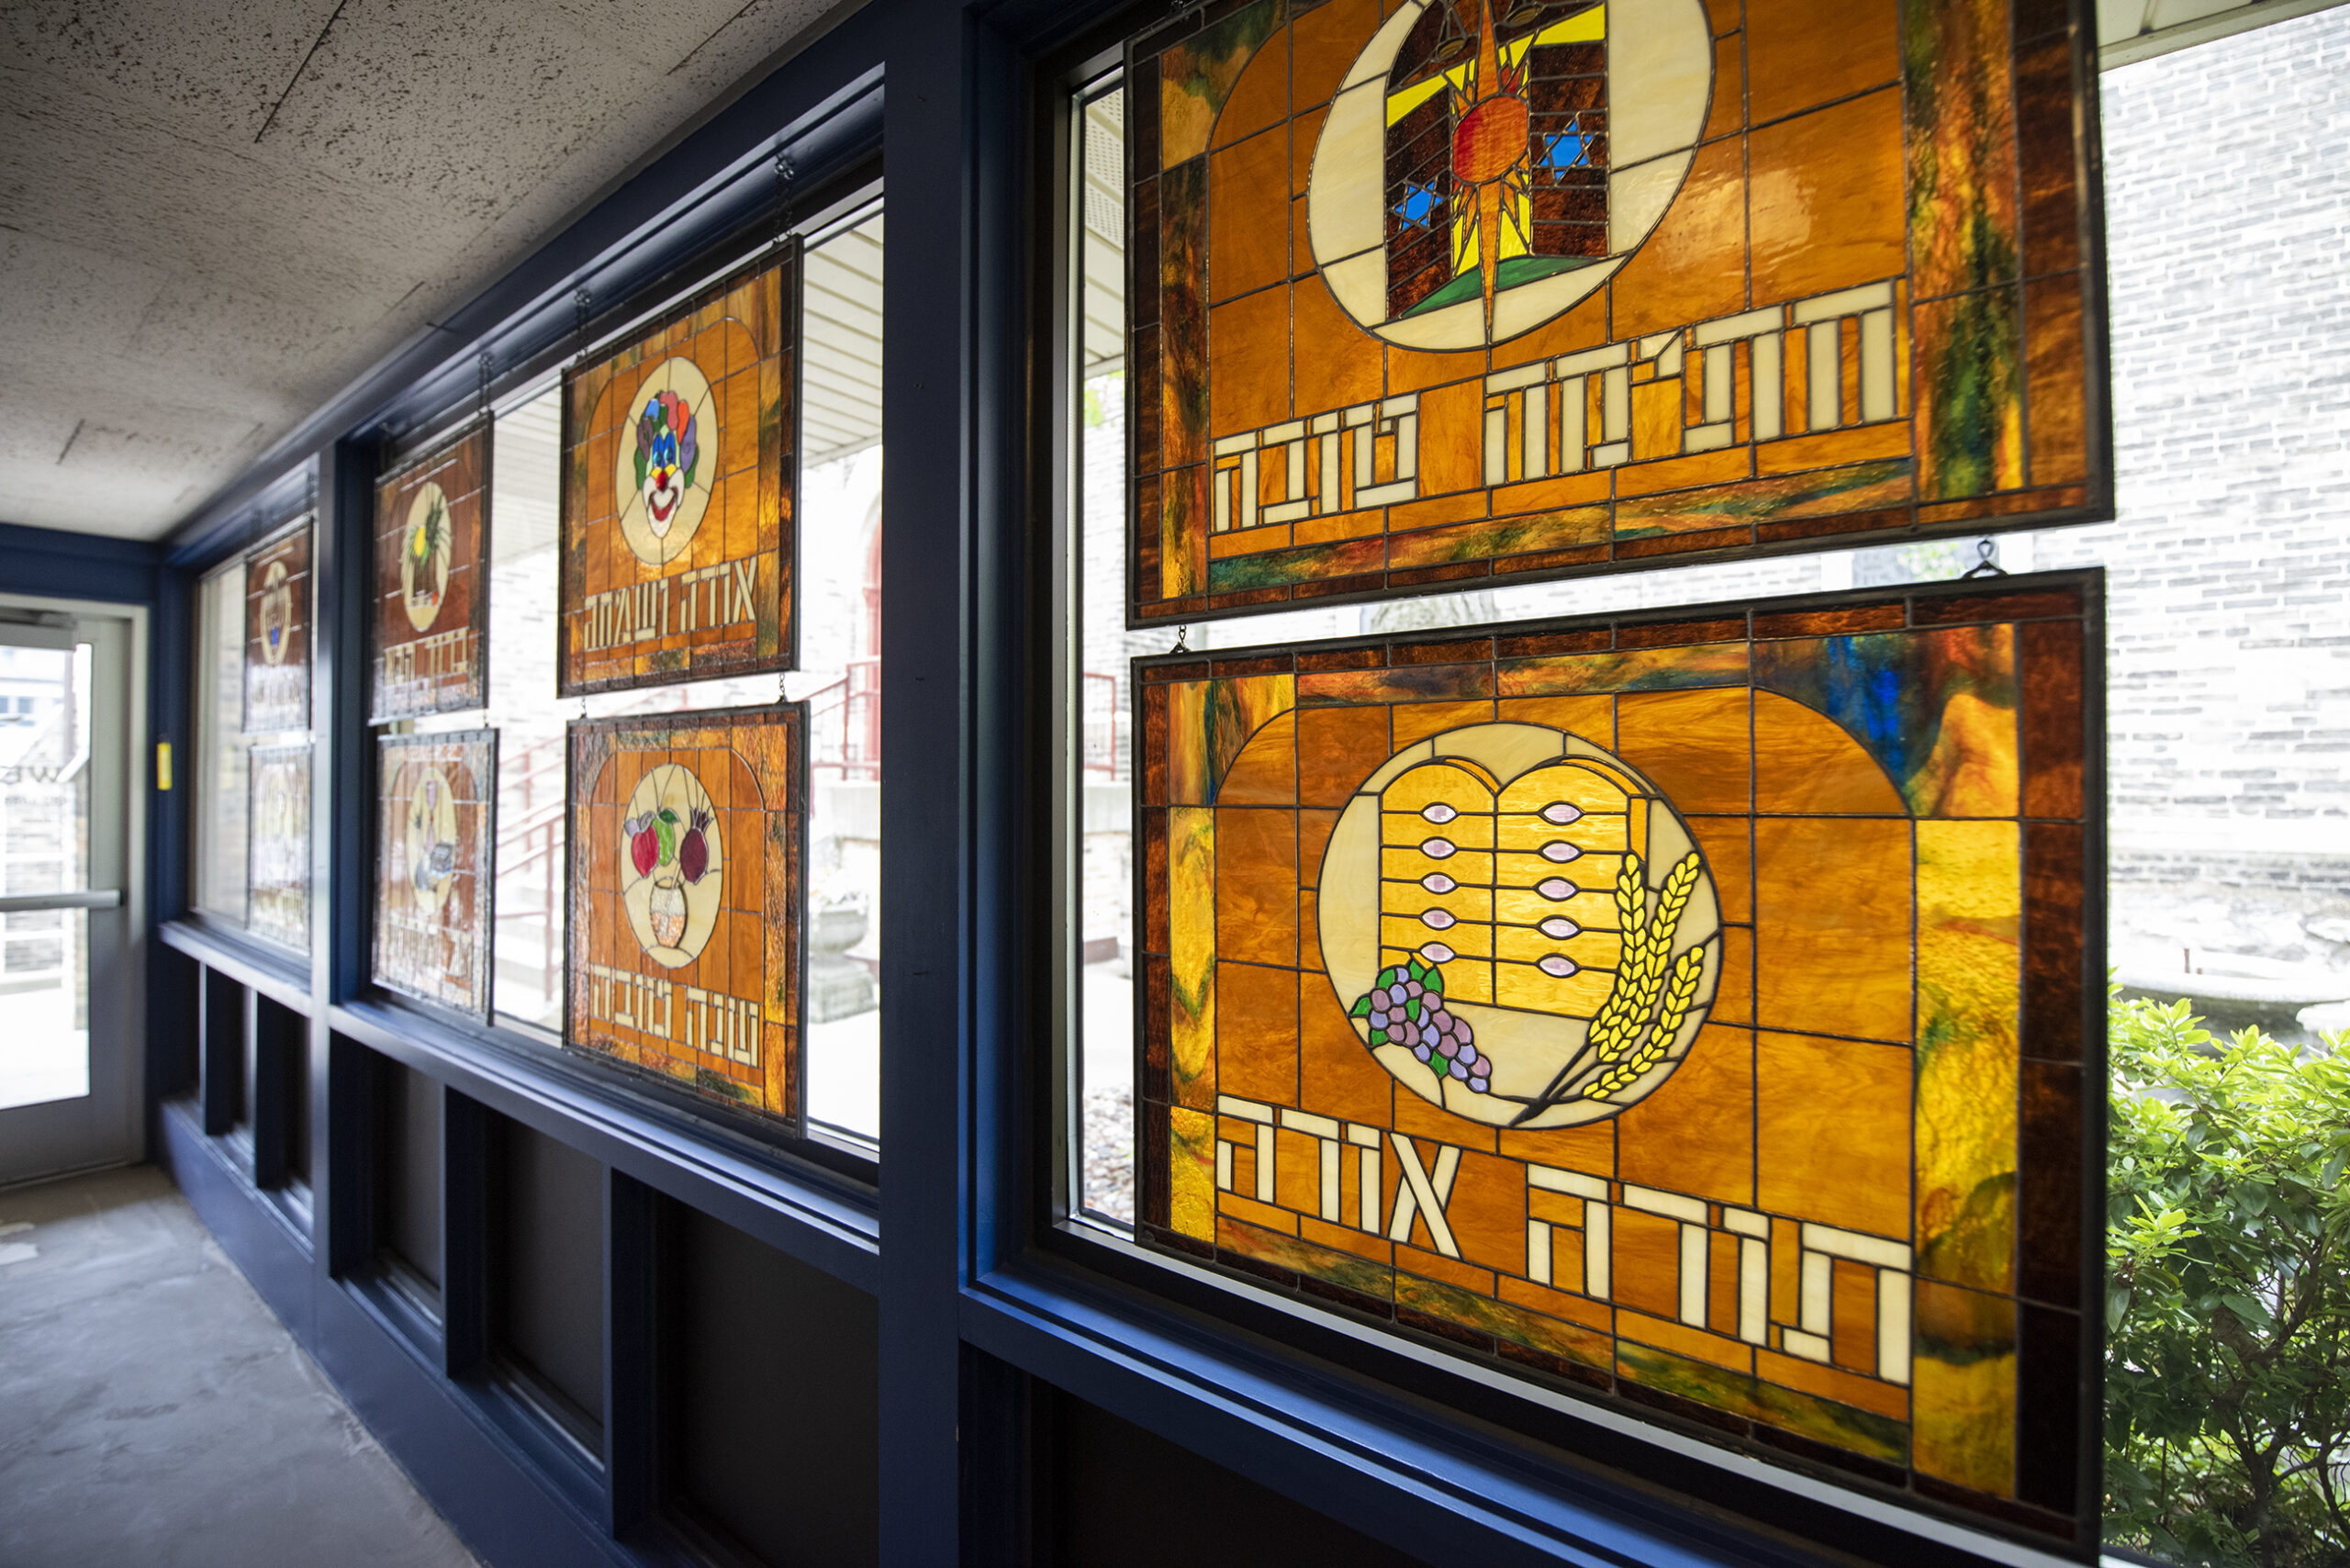 Amber colored stained glass depicting different Jewish holidays are displayed on a window.